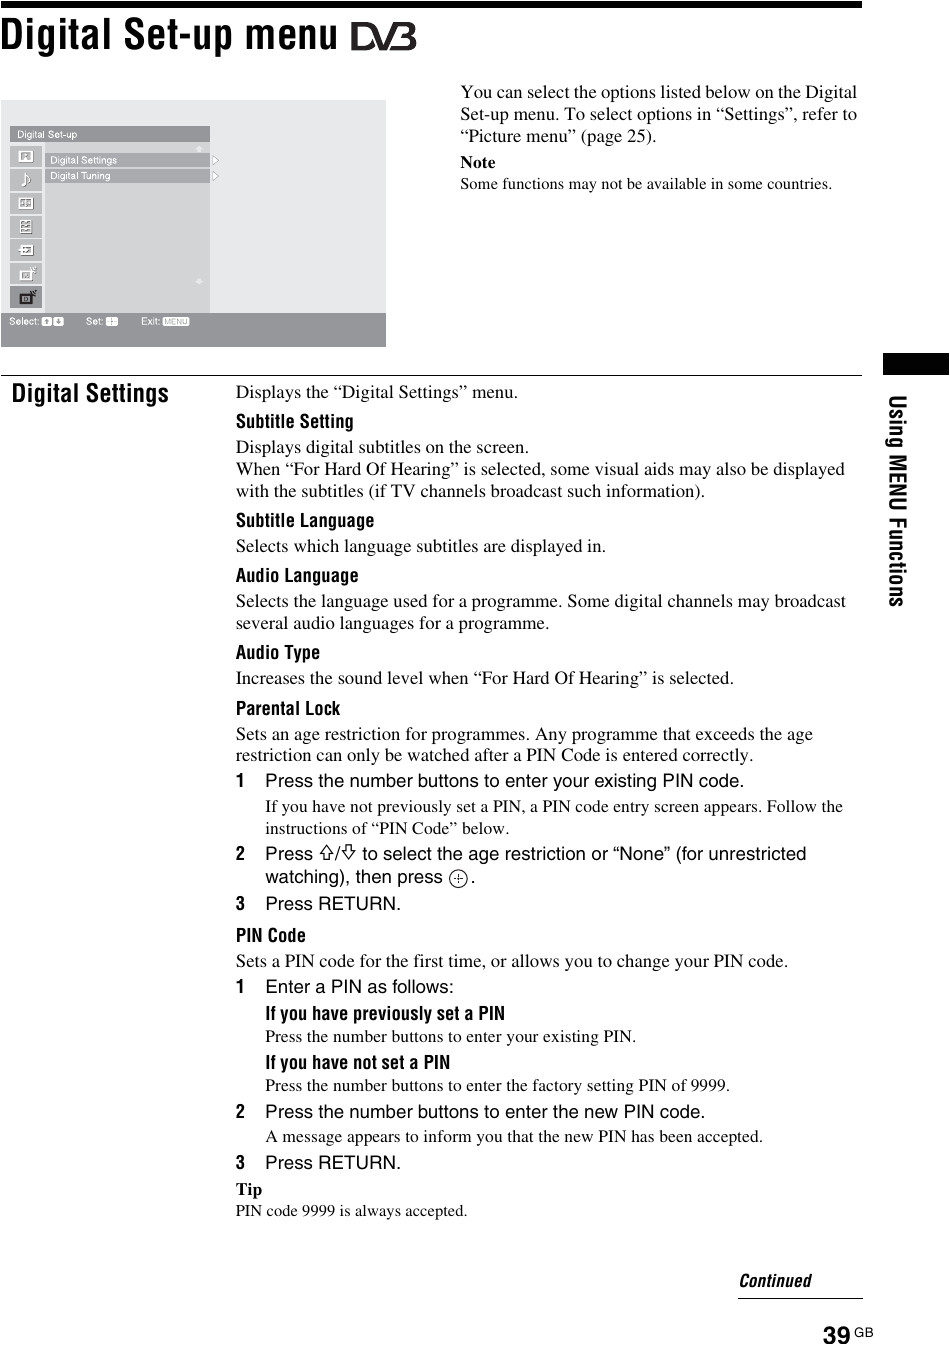 sonykds70r2000usersmanual296393 946990330 user guide page 39 png